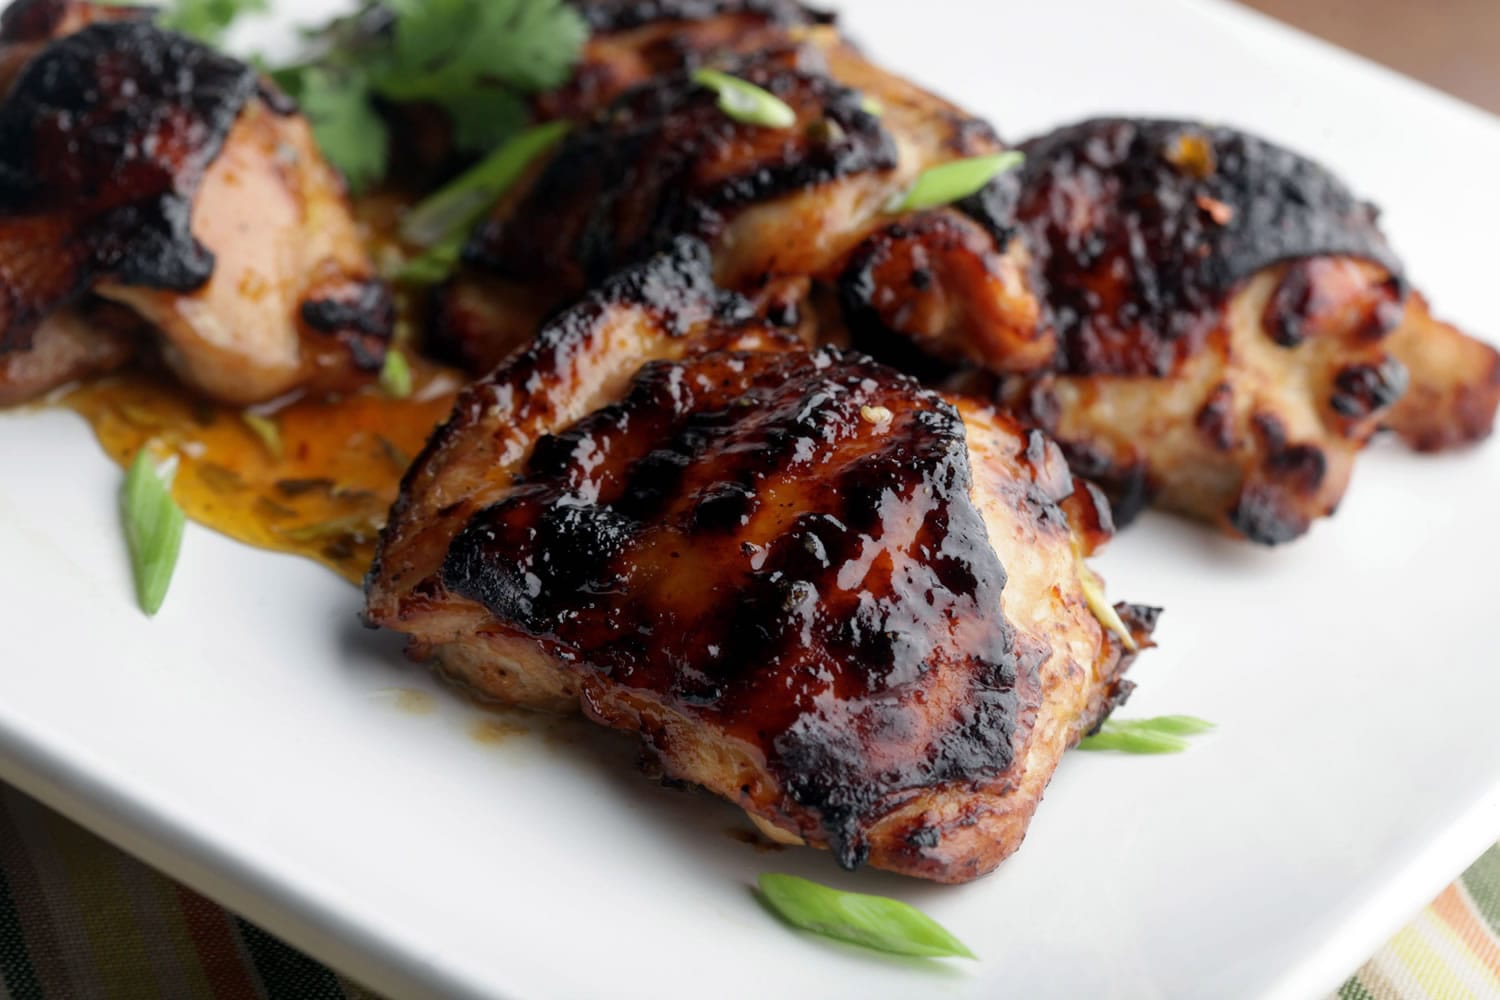 Chicken Thighs with Spicy Apricot Glaze are grilled to perfection.